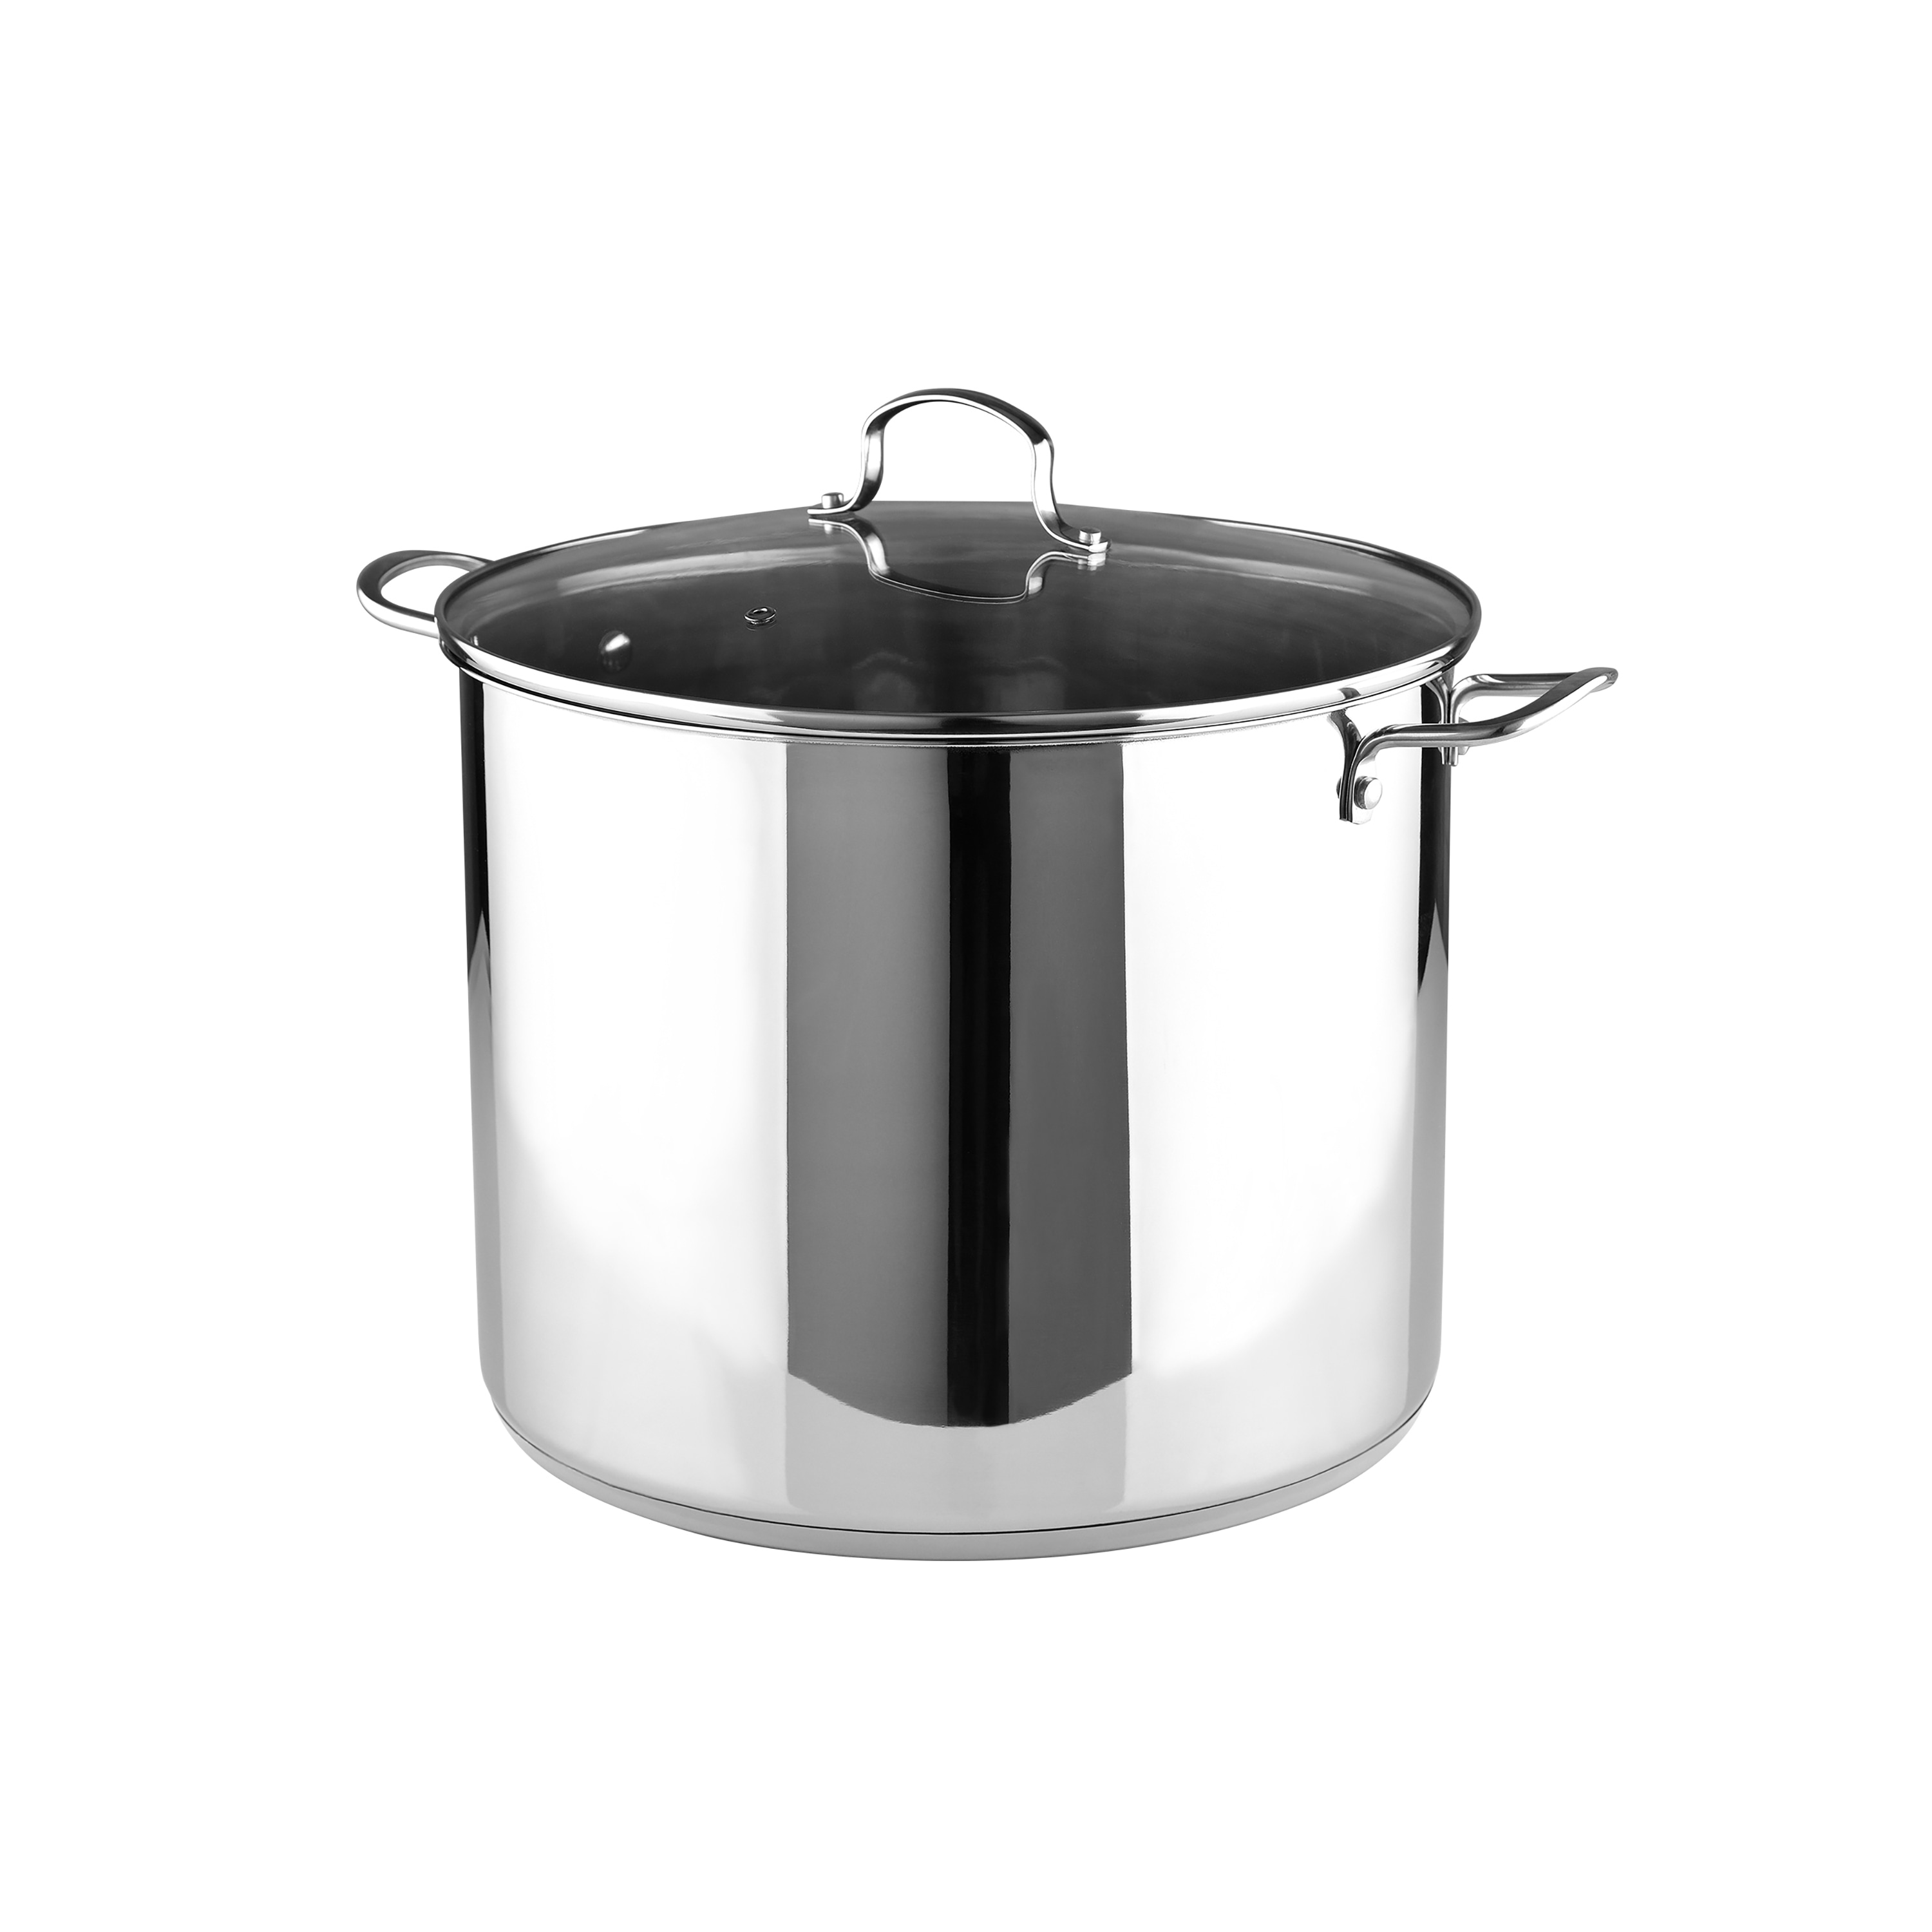 Bergner 12 qt. Stainless Steel Nonstick Stock Pot with Lid